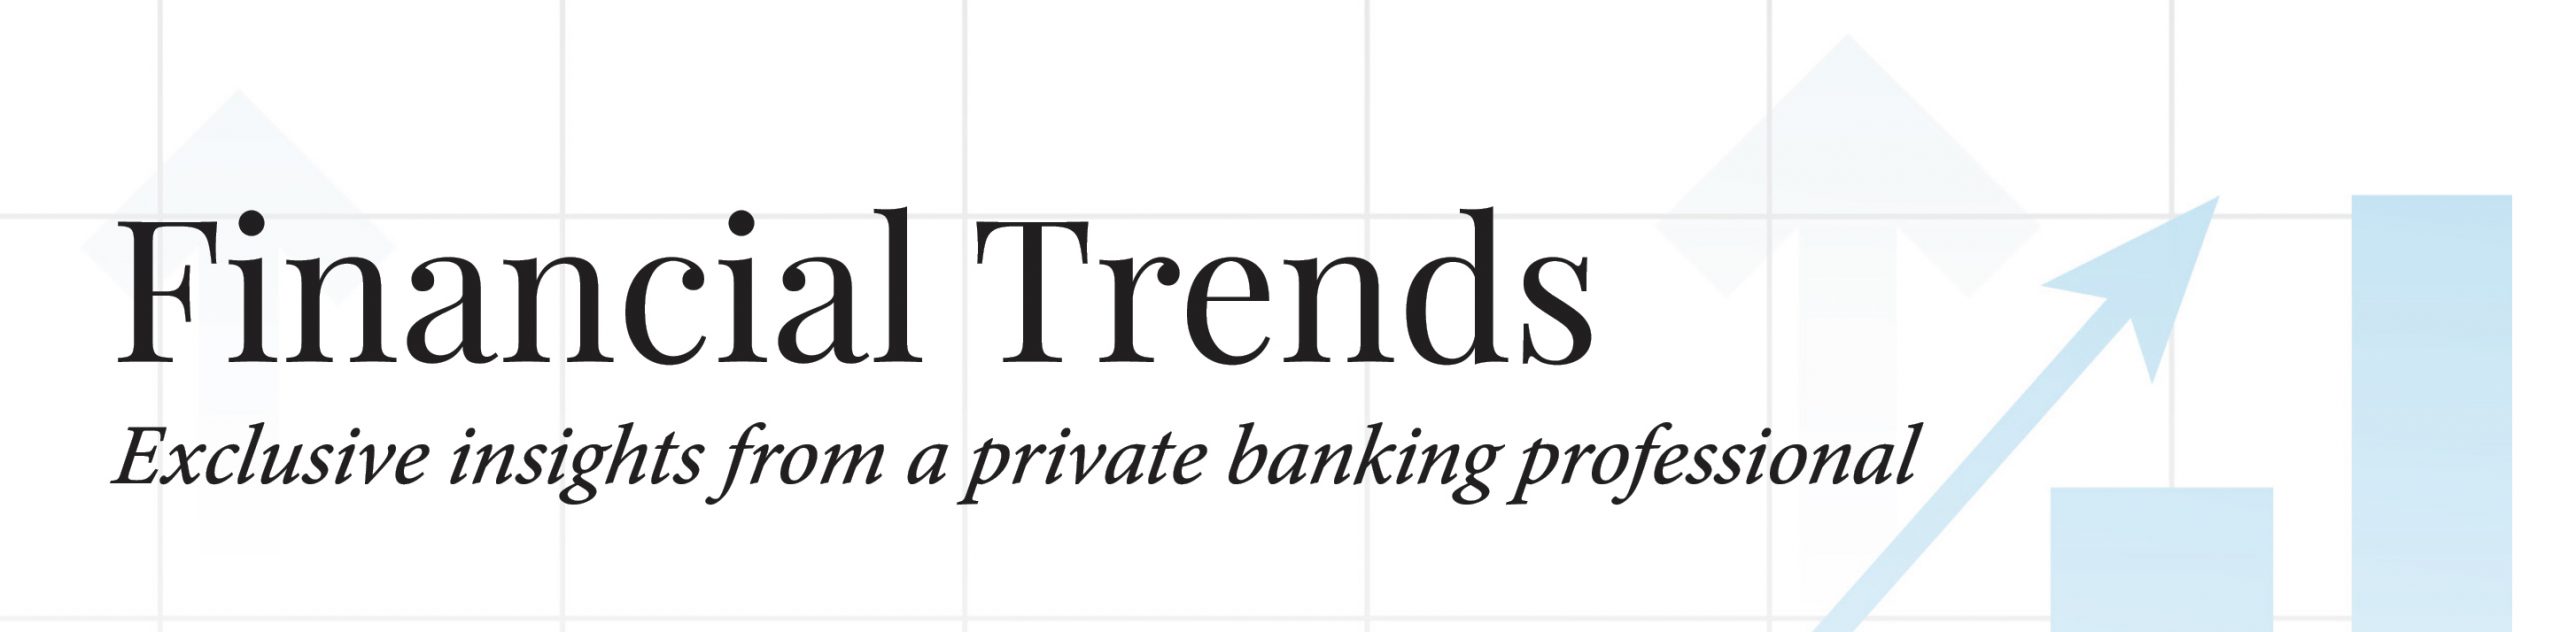 Financial Trends: Exclusive insights from a private banking professional